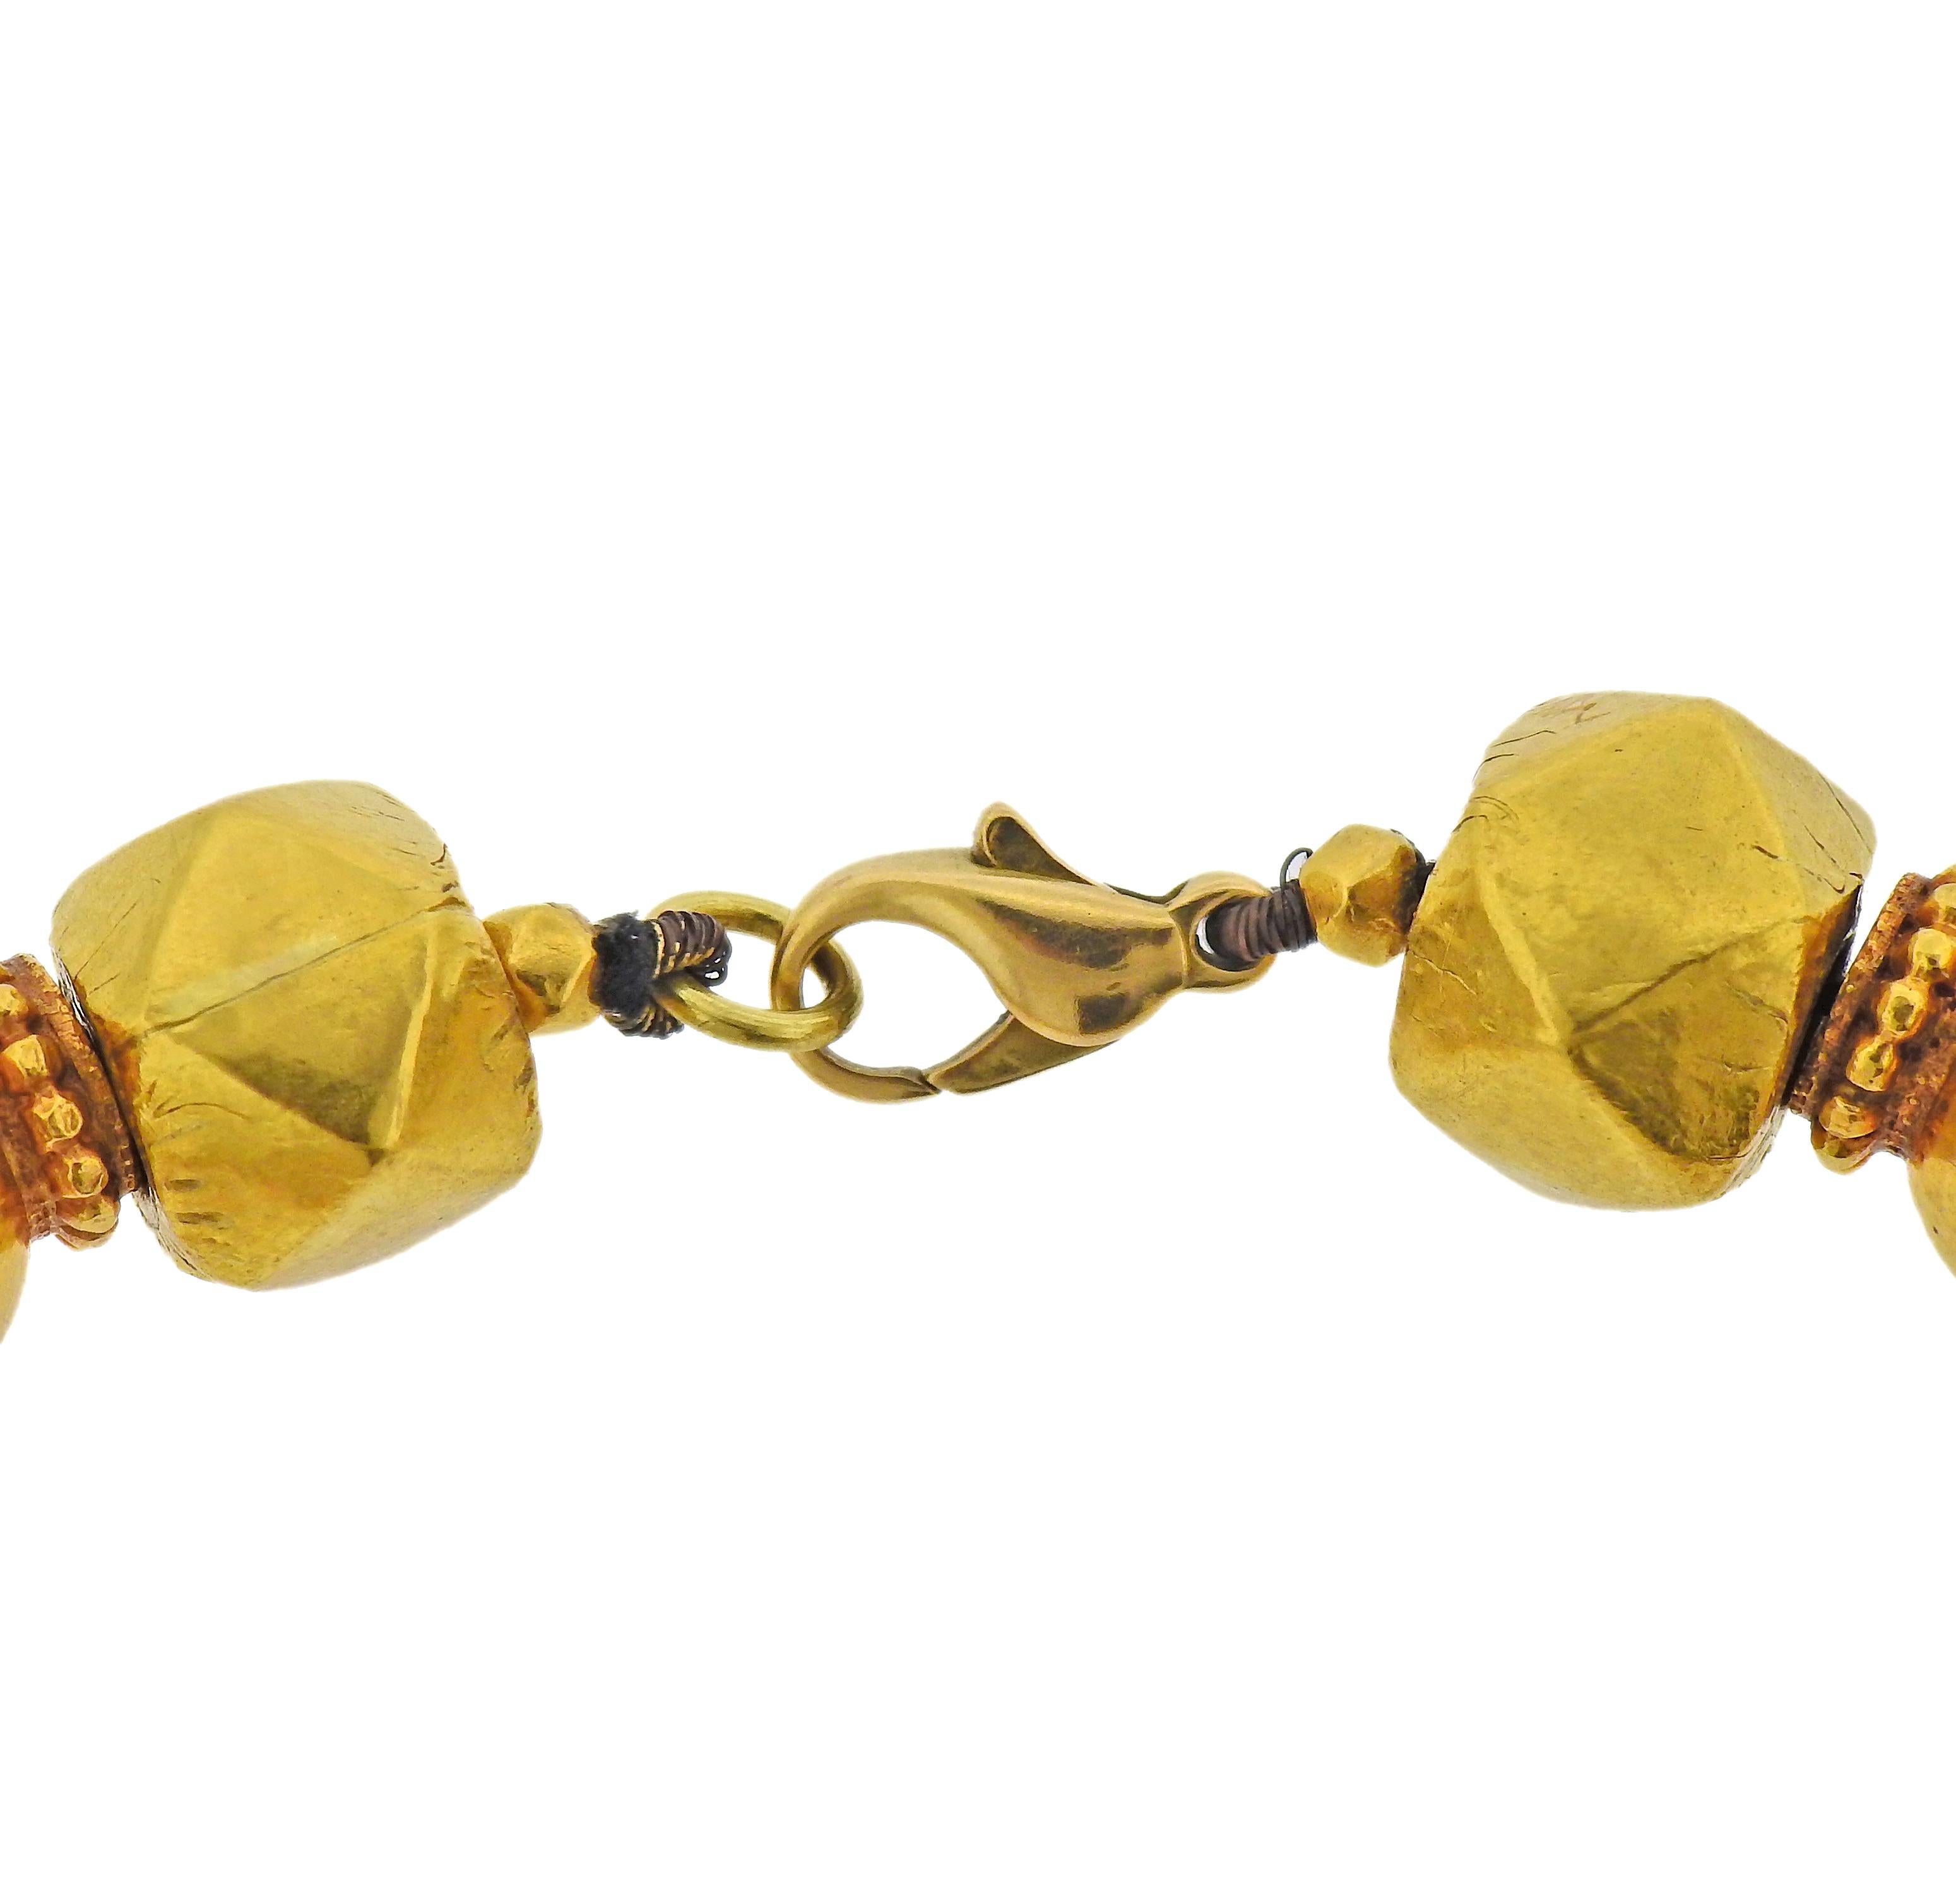 22k yellow gold geometric beads, suspended on a cord with French 18k gold clasp. Necklace is 17